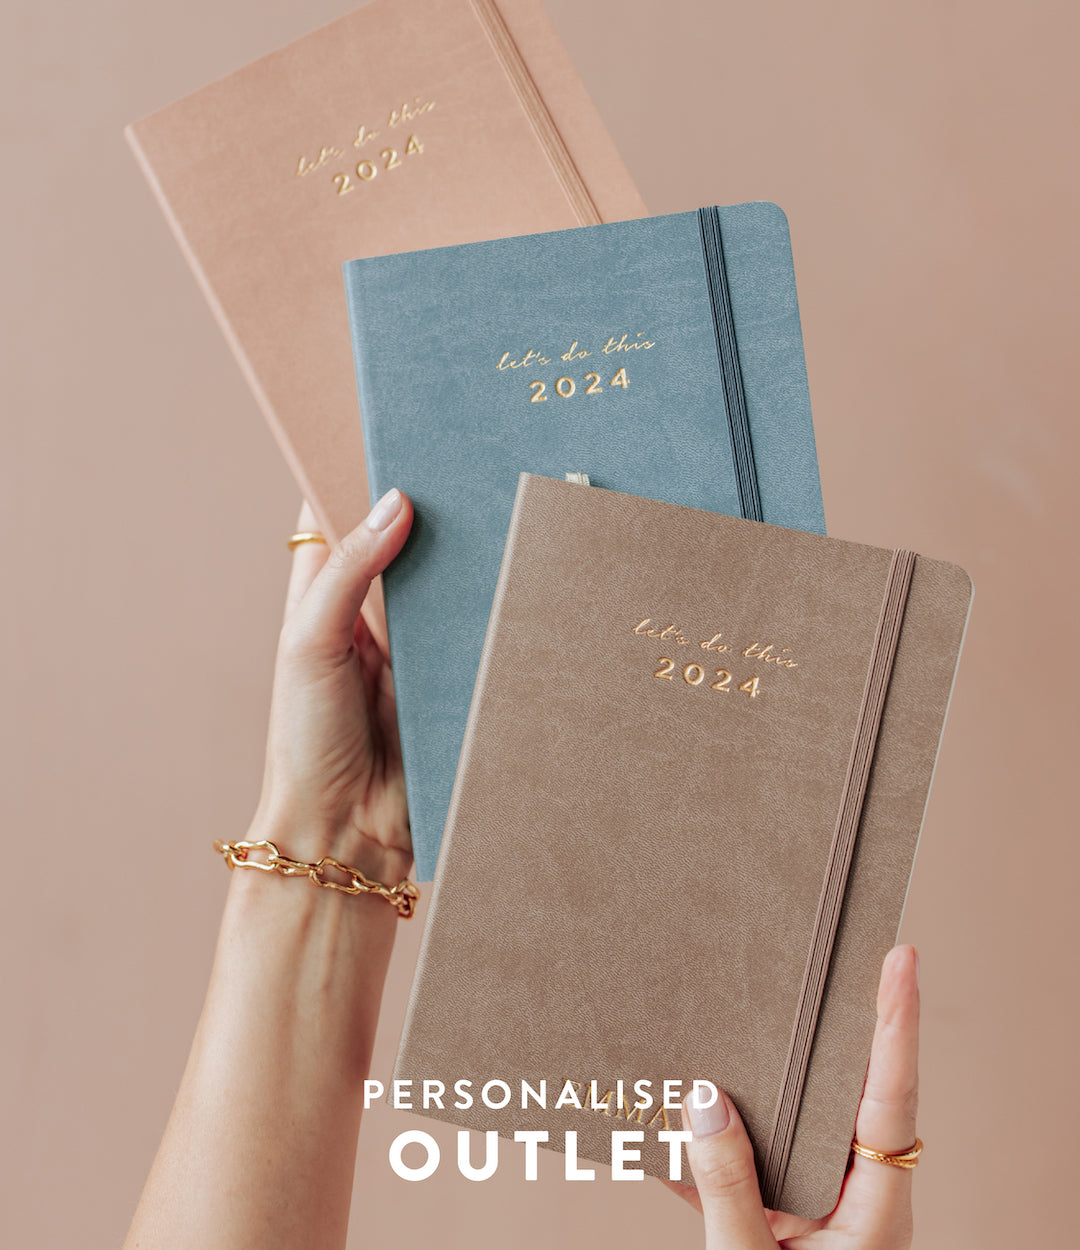 (Personalised Outlet) 2024 Vertical Planner